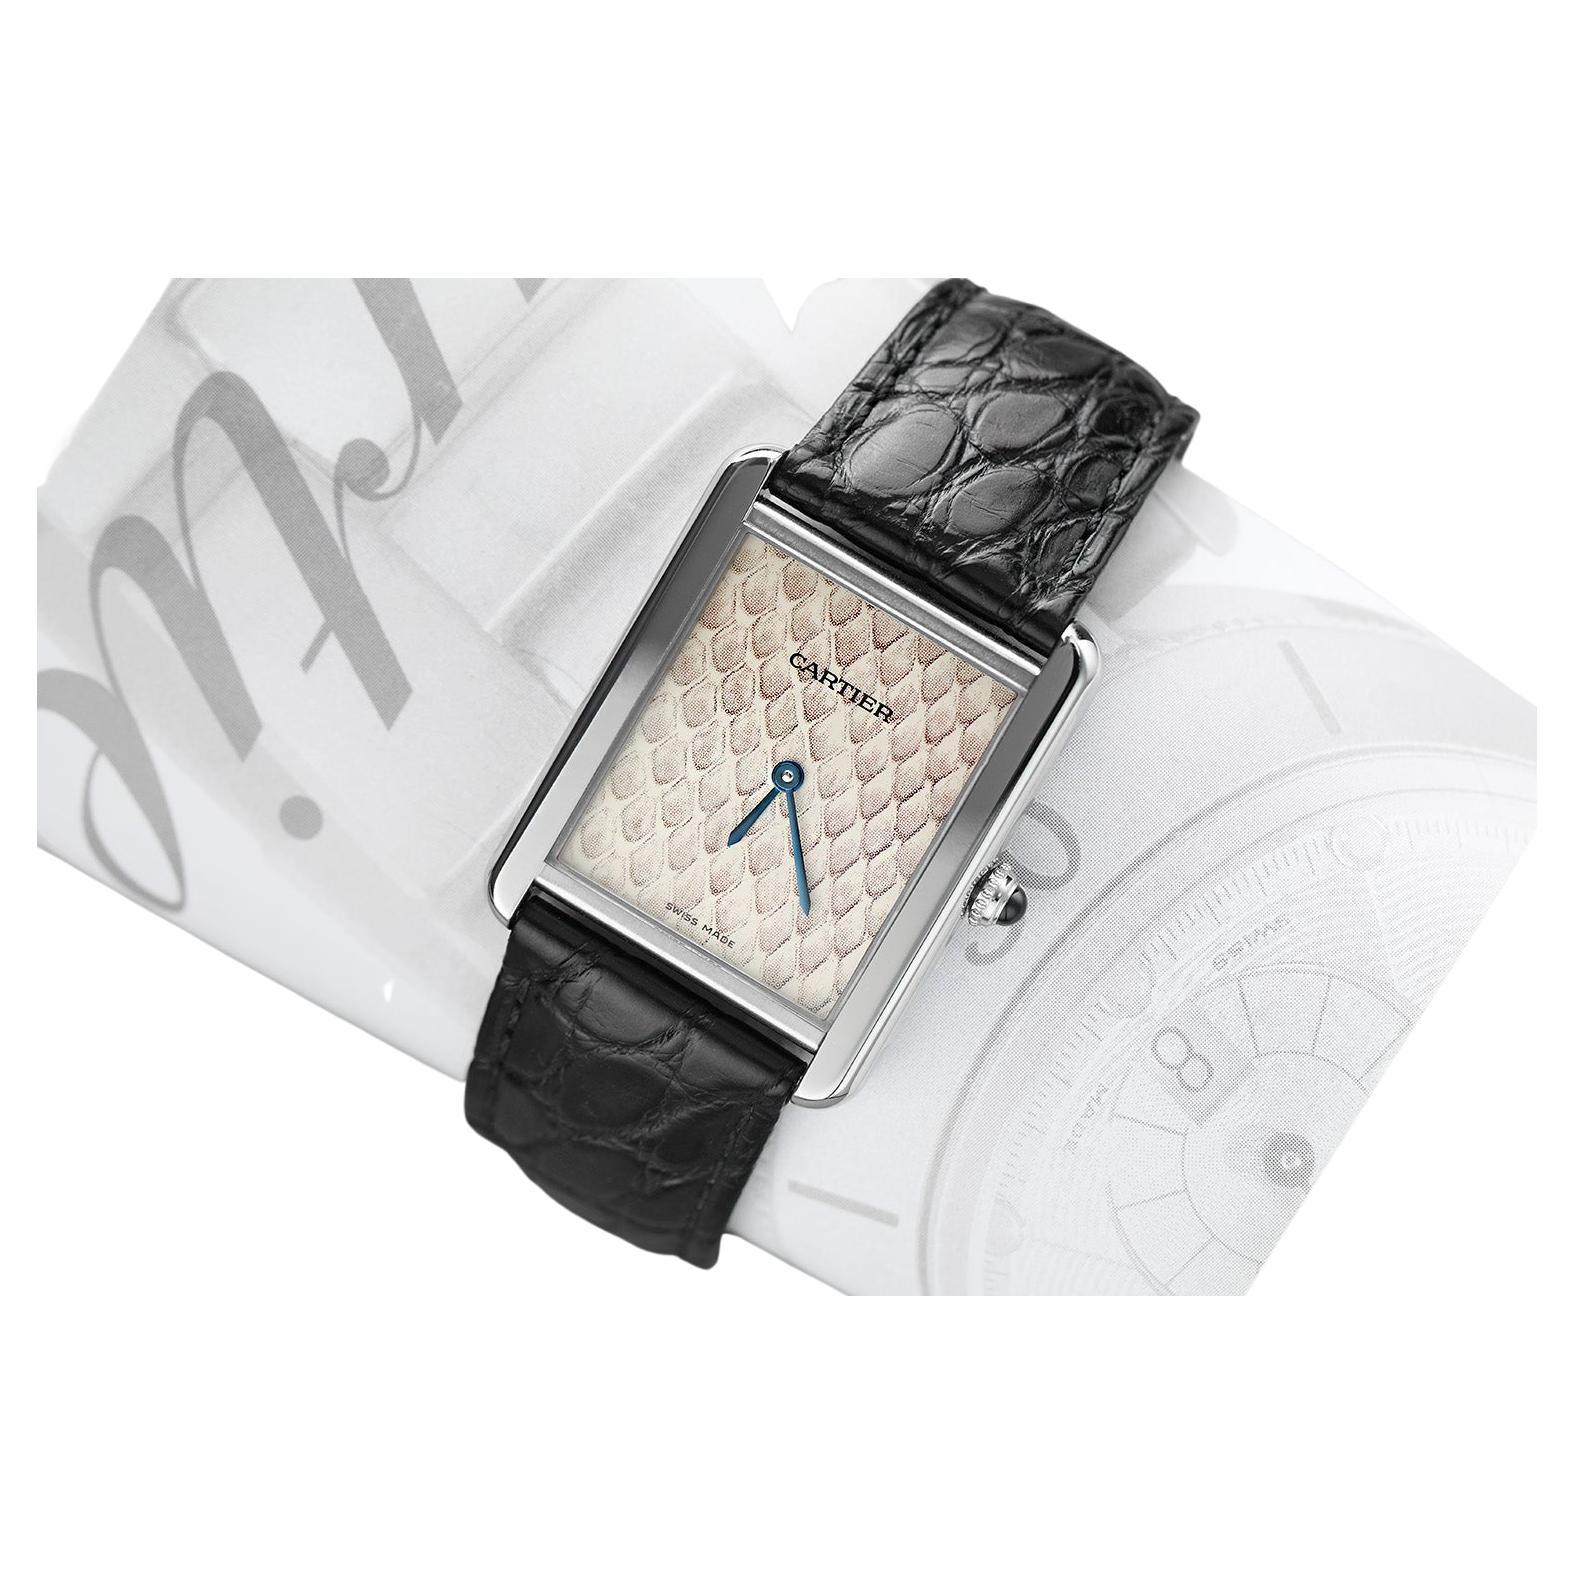 Cartier Tank Solo W5200020 Black Dial Certified And Warranty At 1stdibs